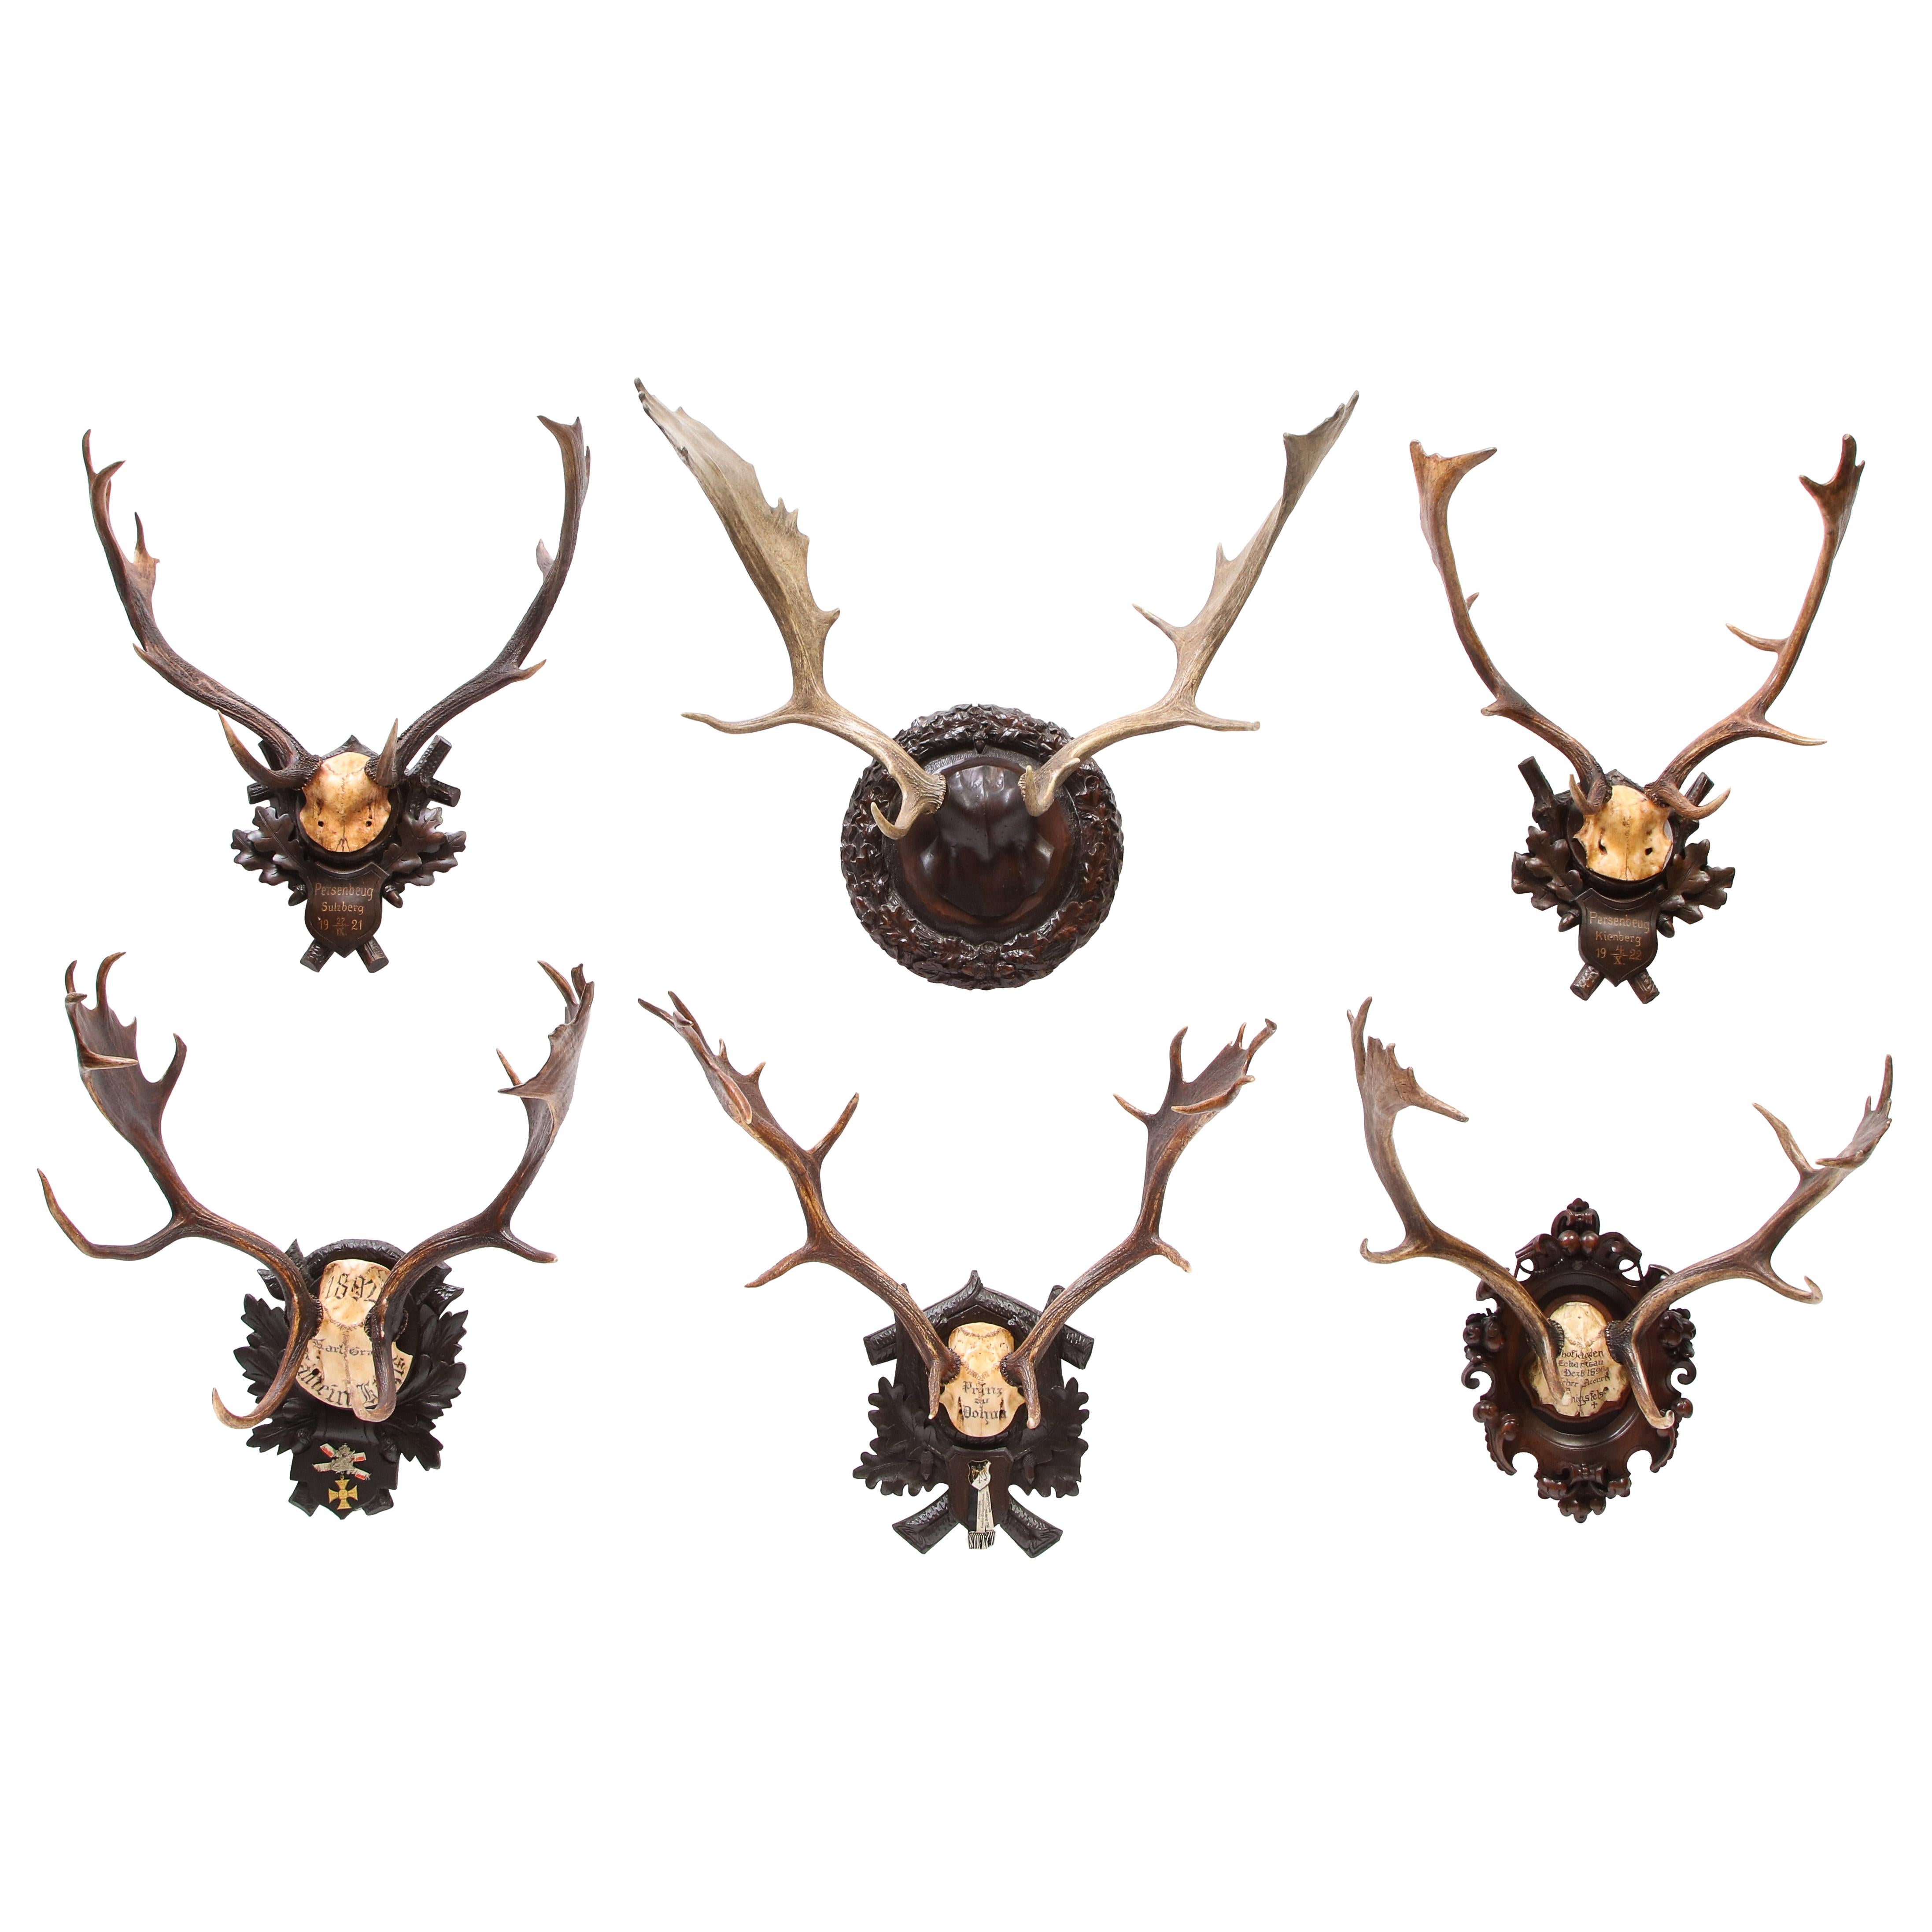 Group of Six Swiss 'Black Forest' Moose Antler Trophy Mounts, Early 20th Century